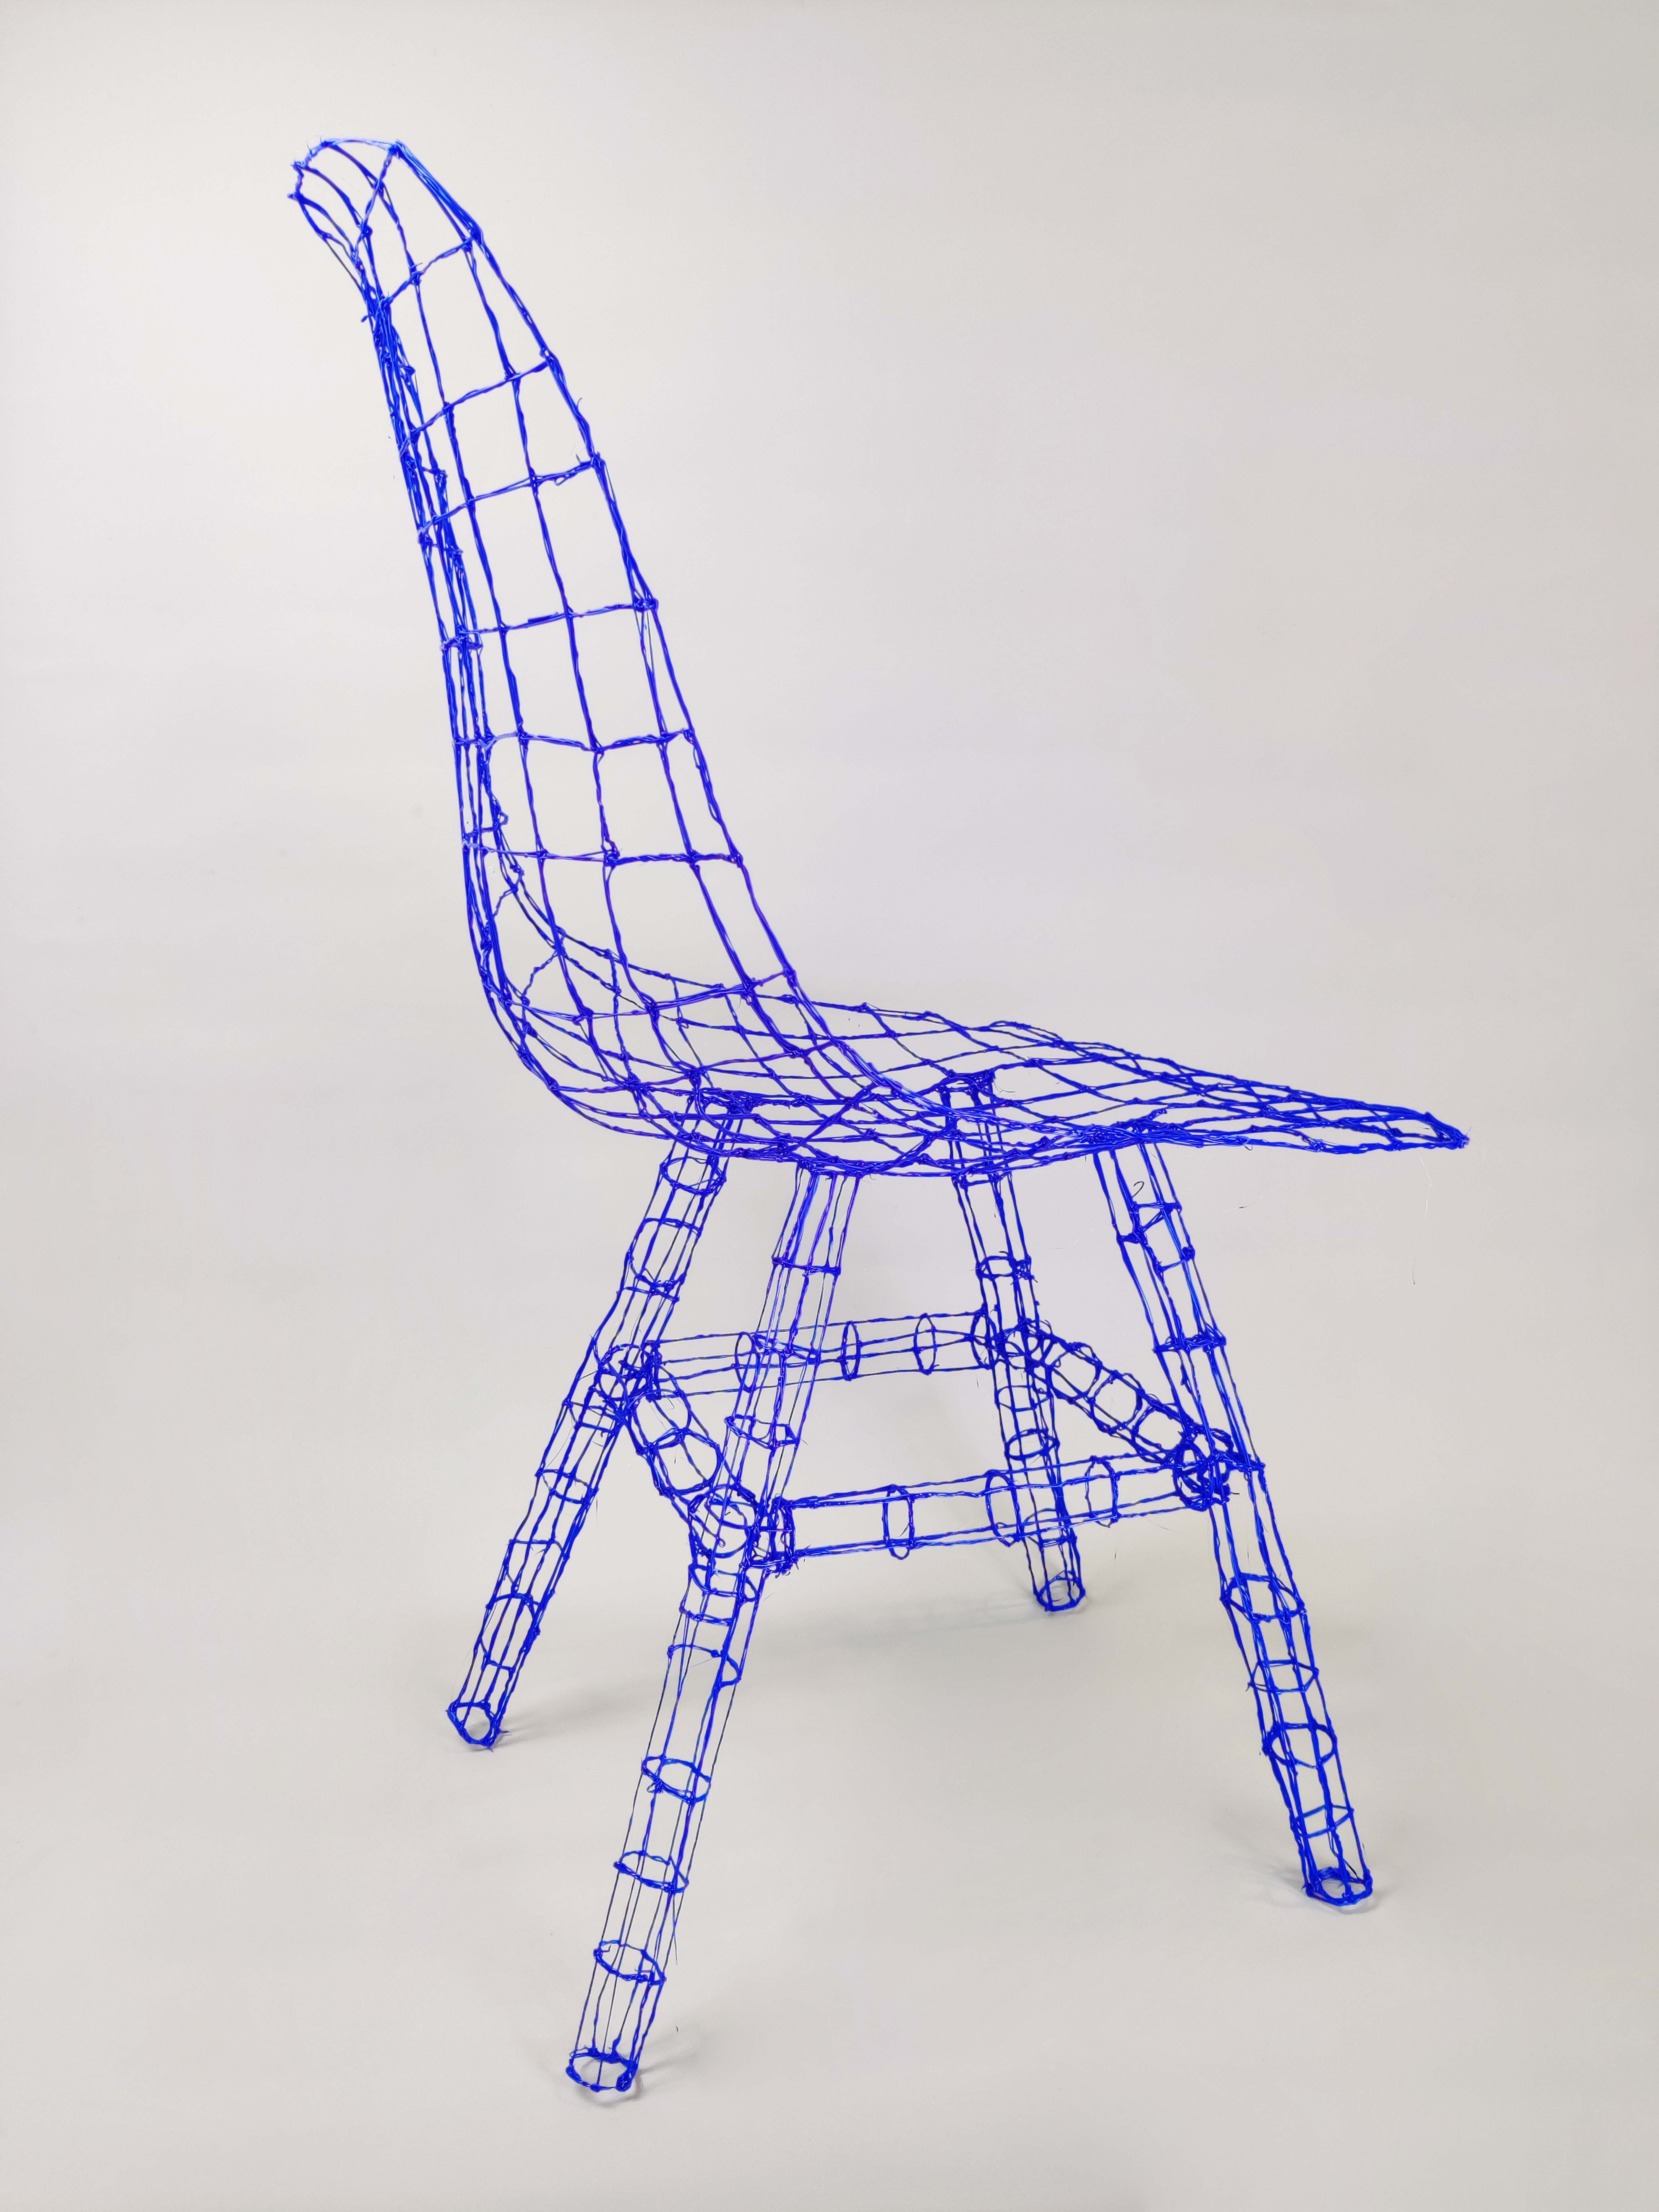 3D DRAW OBJECT - CHAIR BLUE